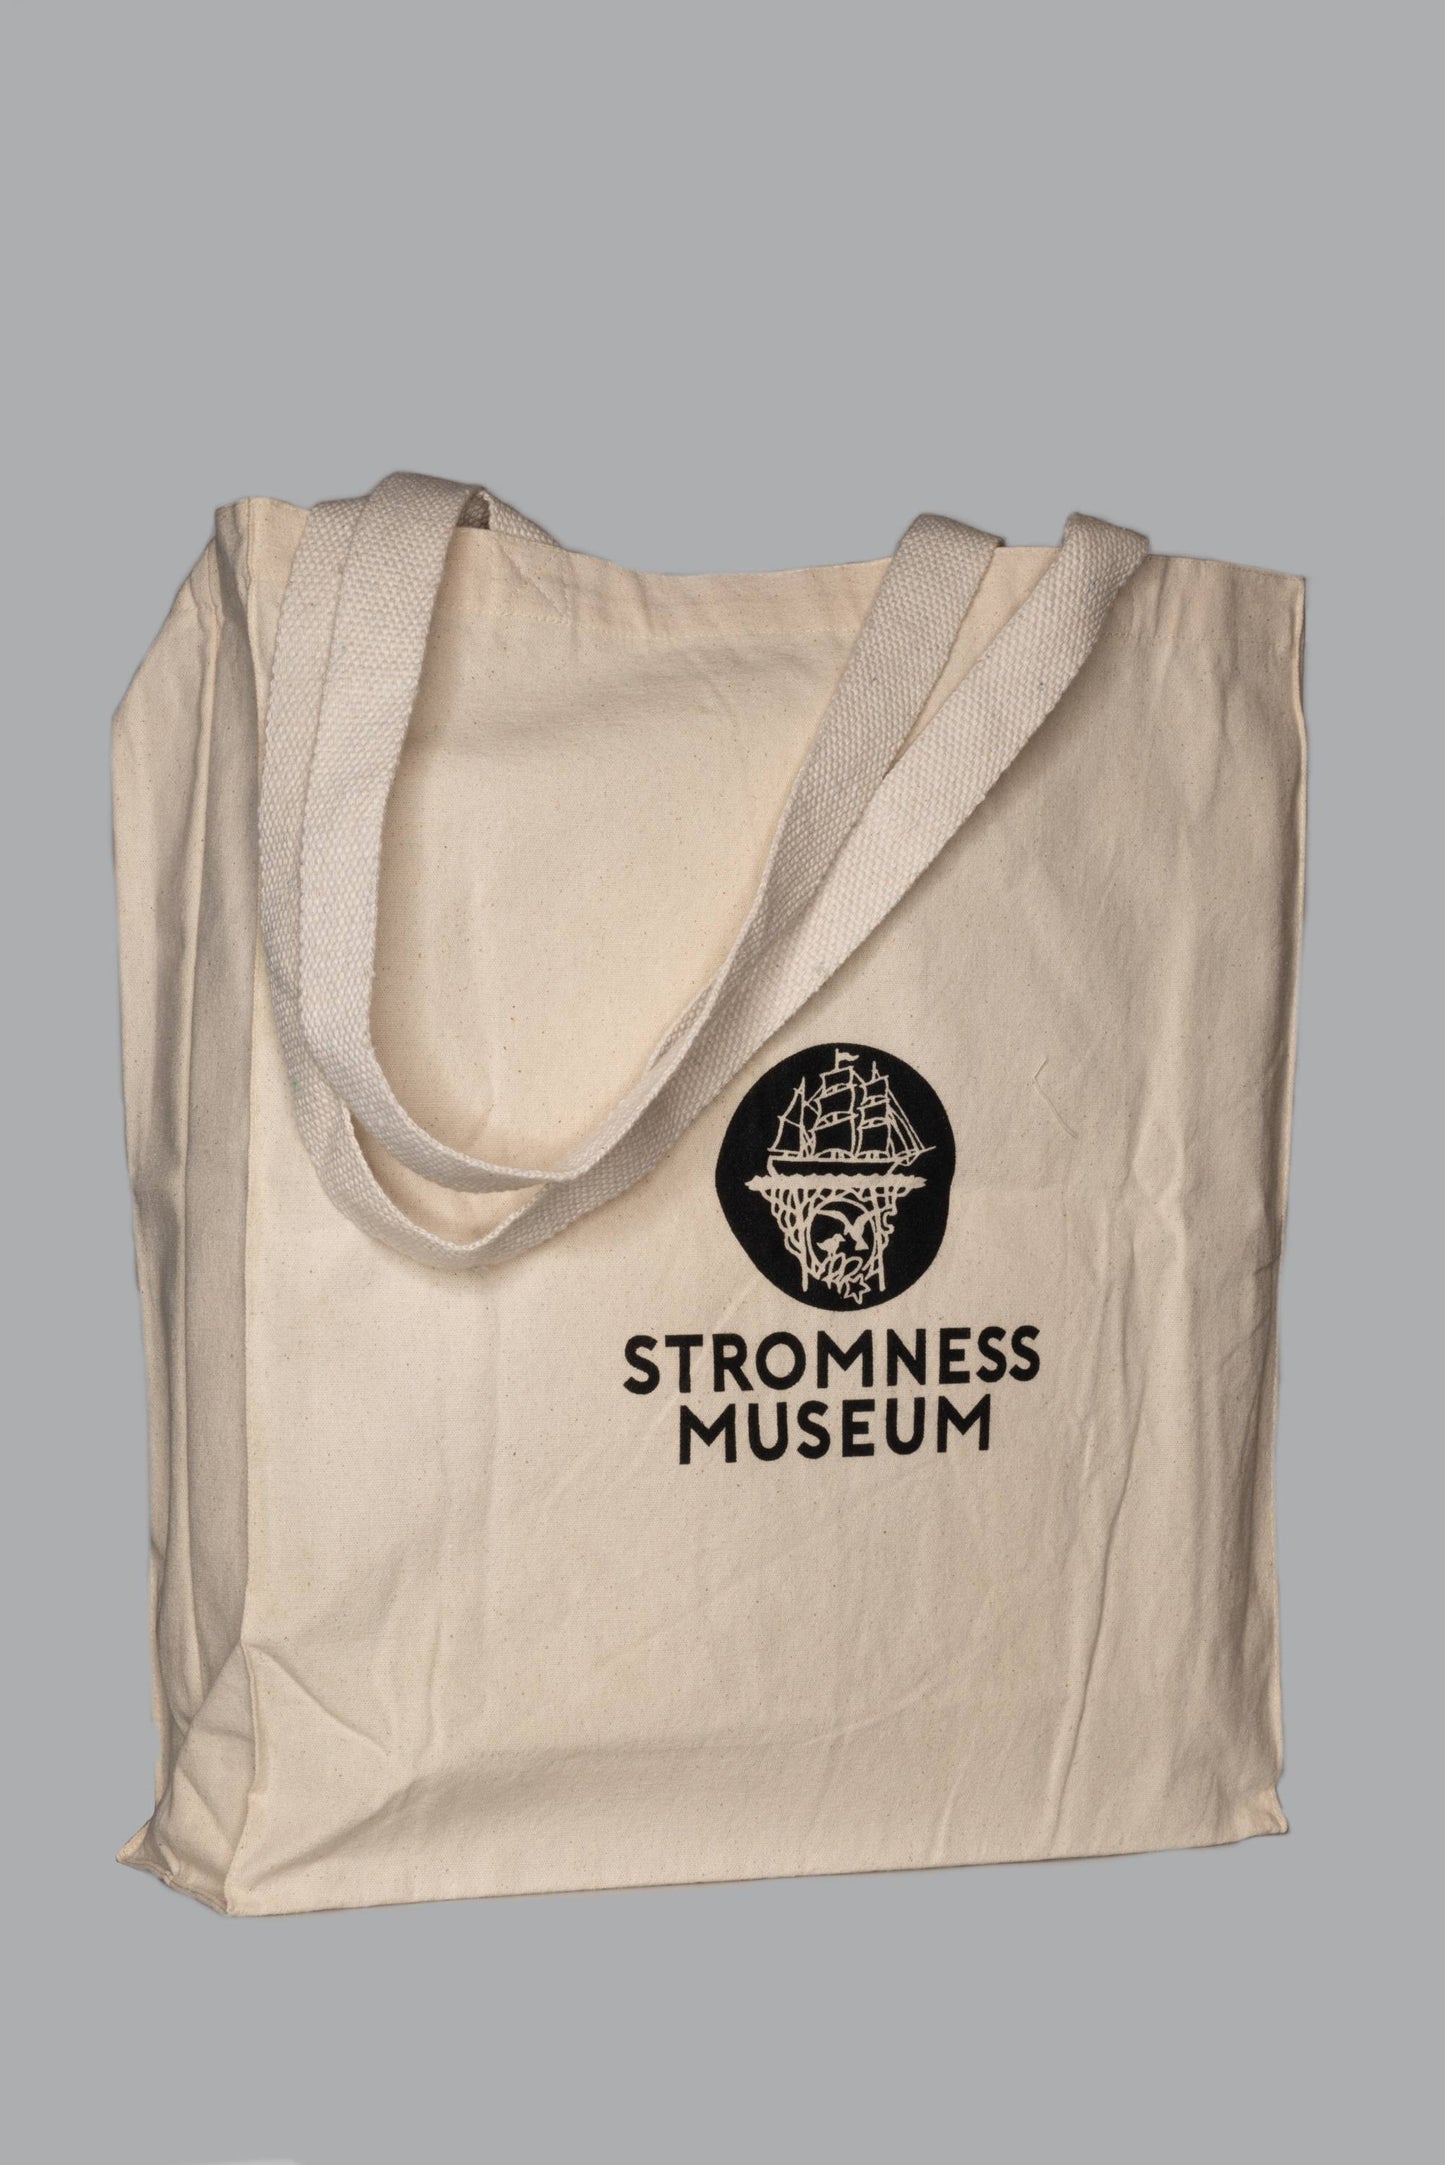 Stromness Museum Shopping Bag